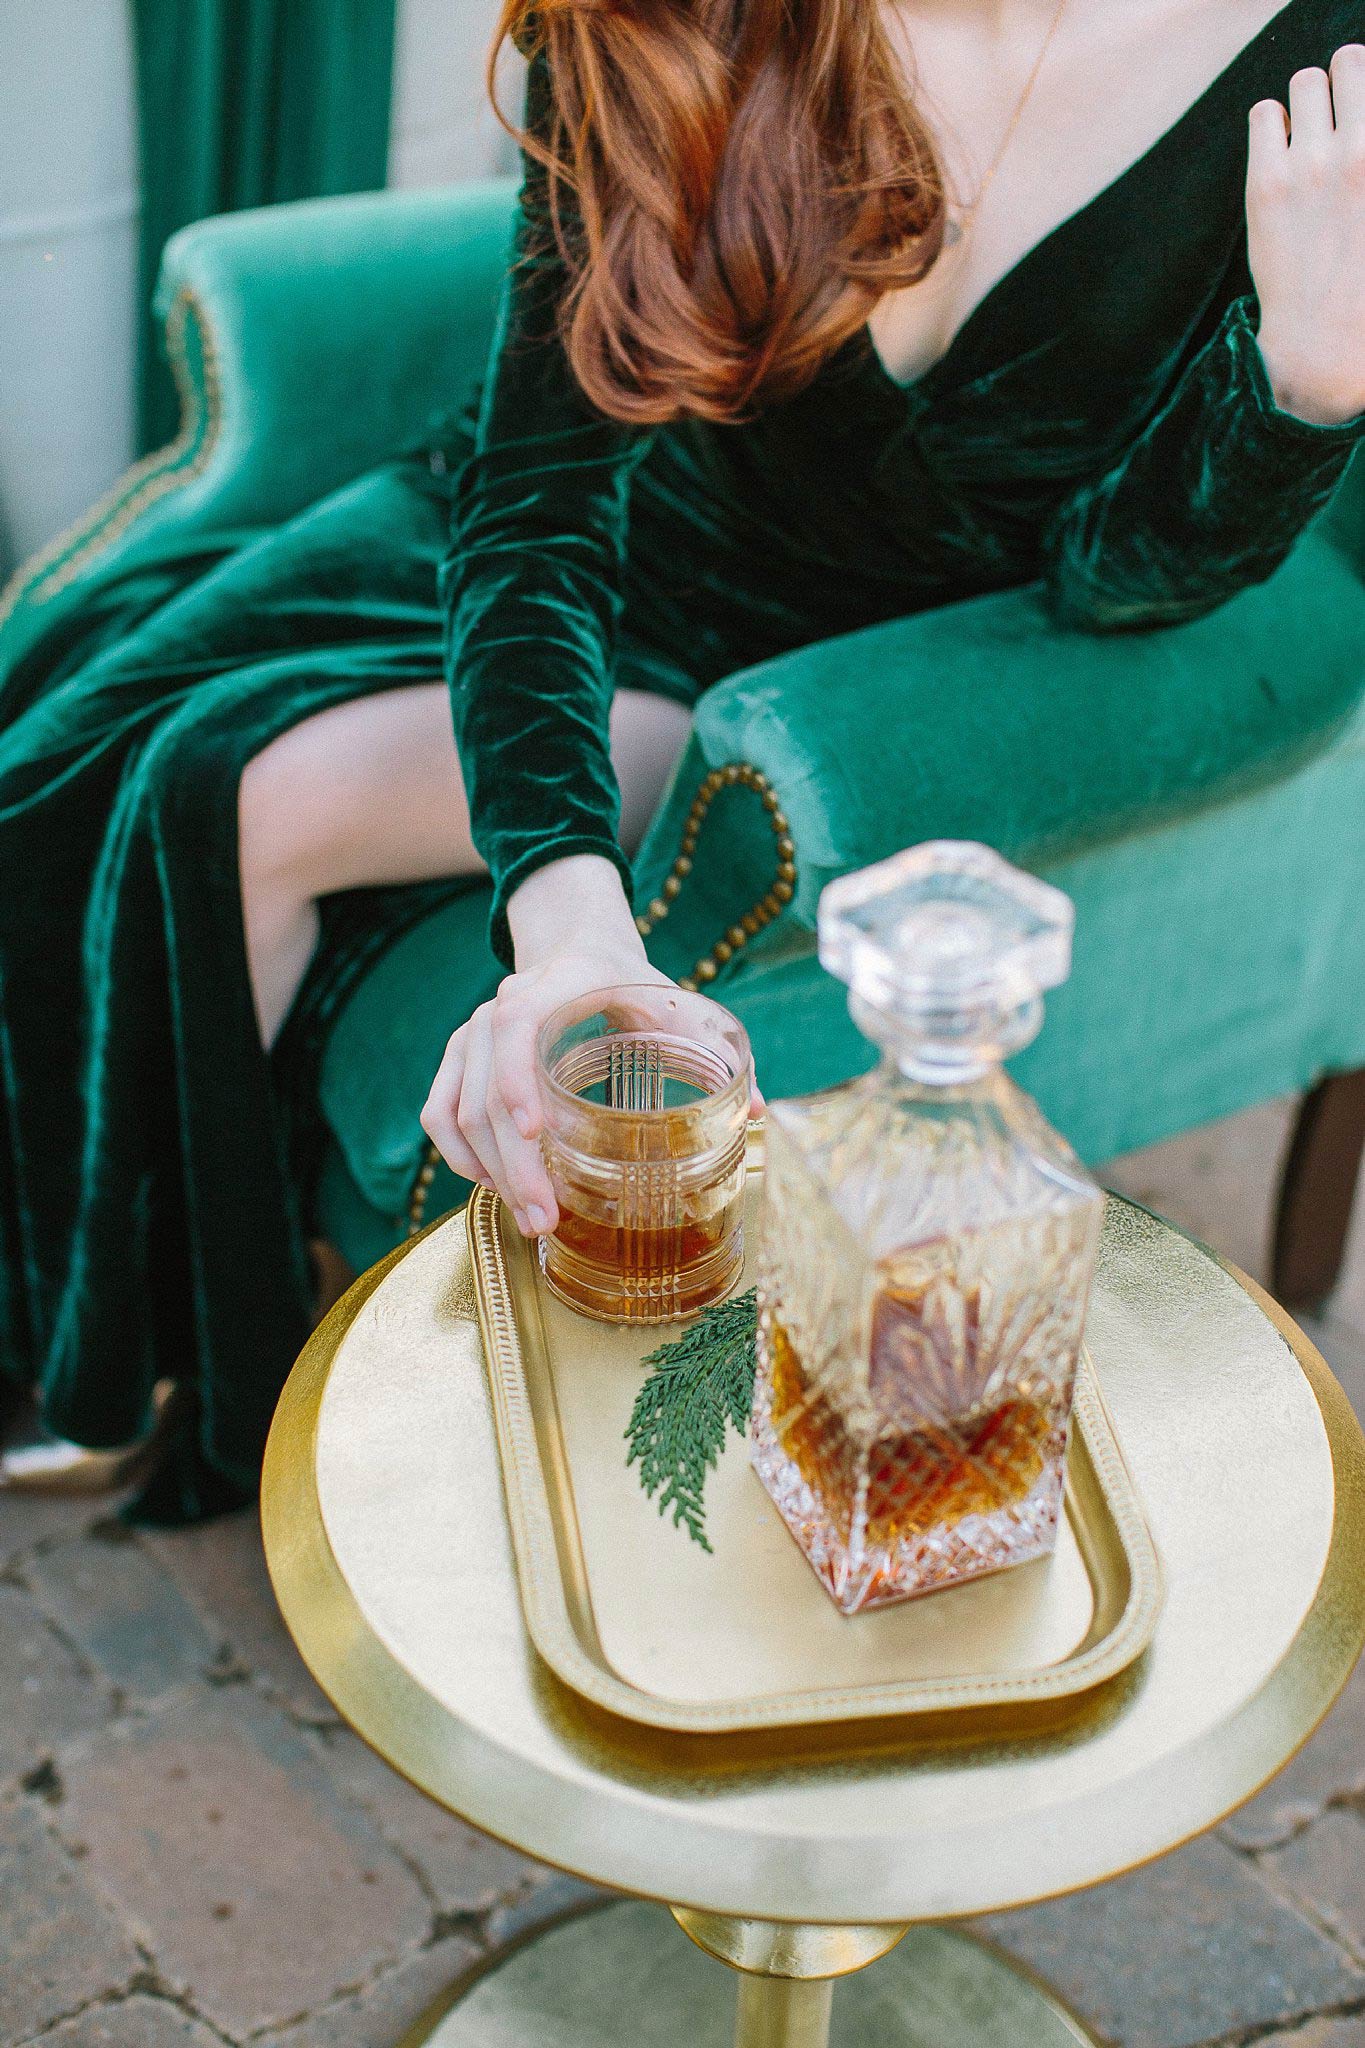 aristide mansfield wedding with green chair and whiskey